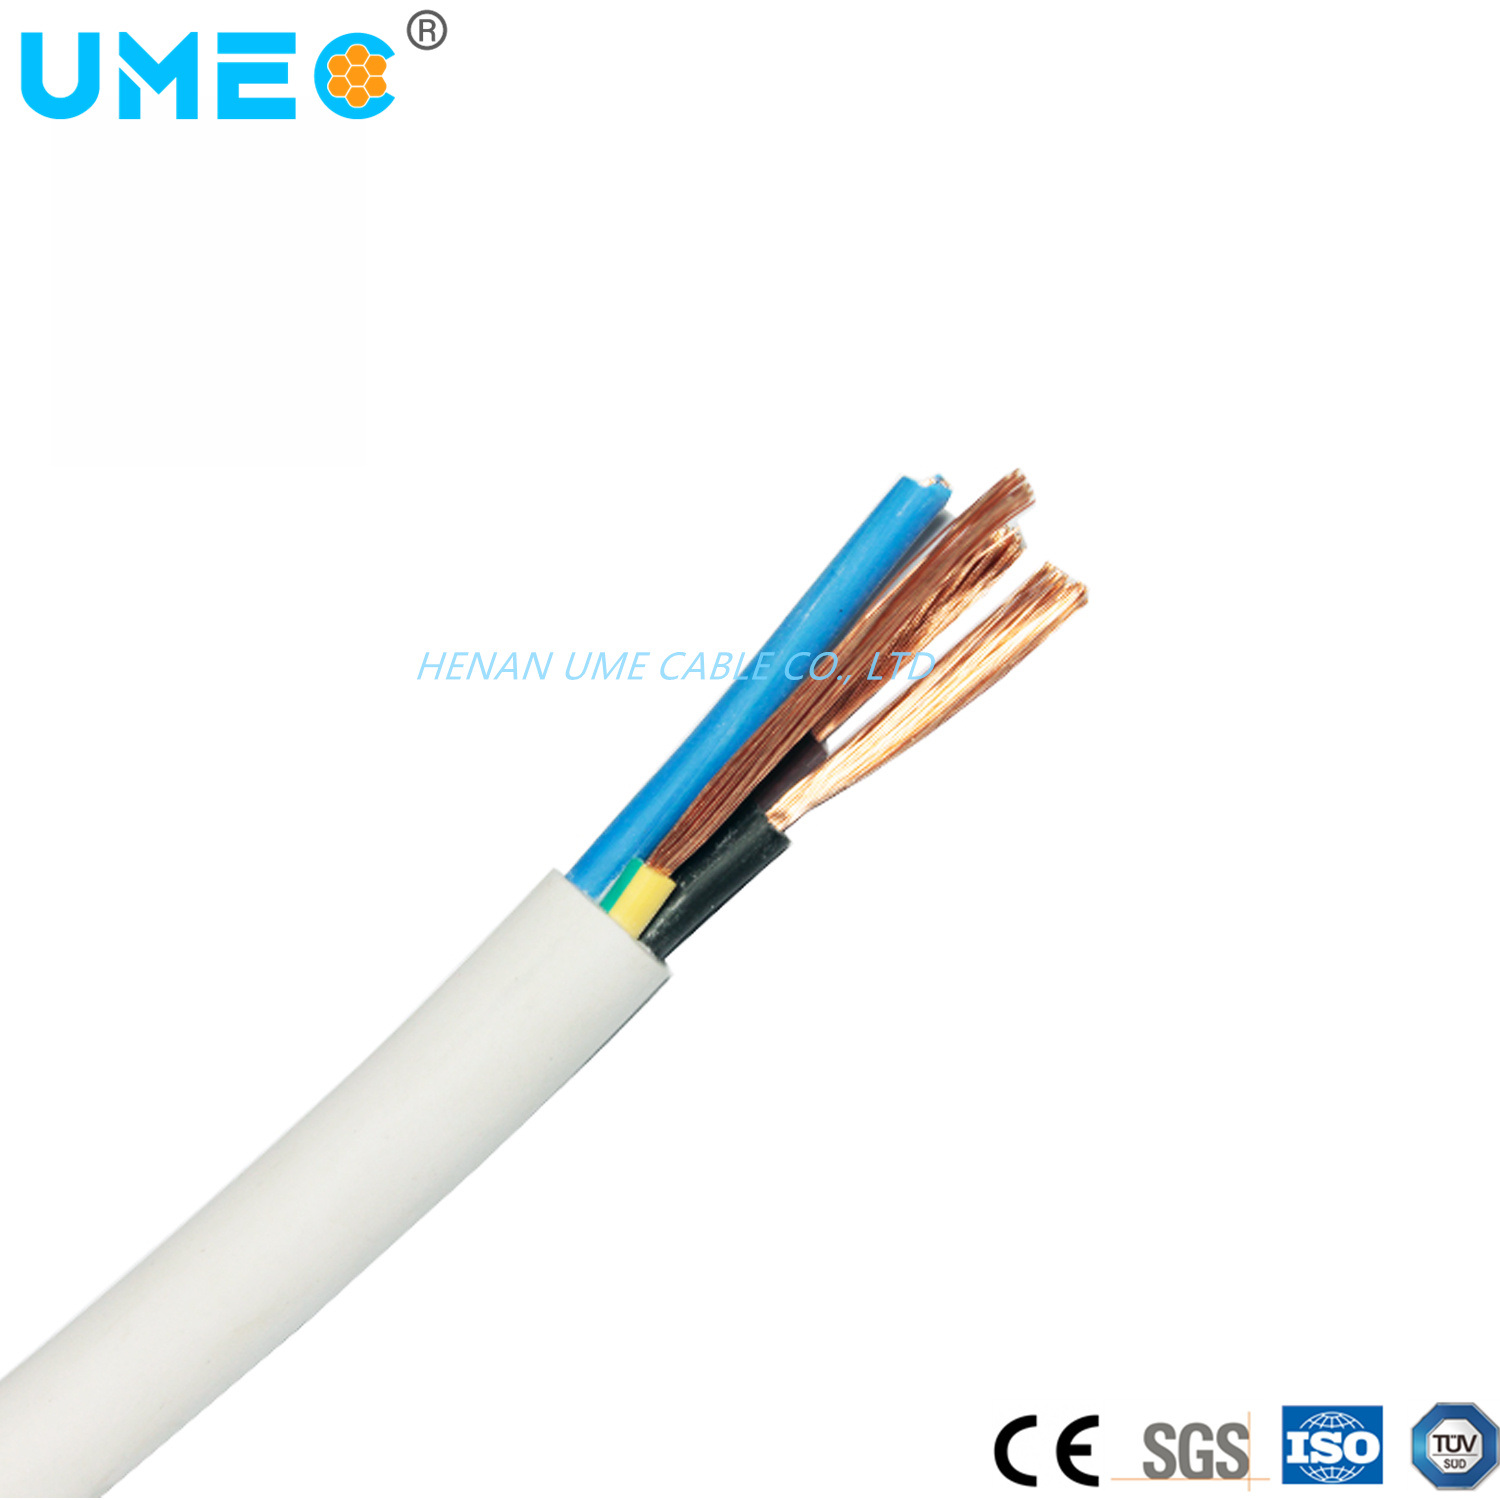 IEC Best Selling Control Cable Liycy (TP) Cable 4 X 0.14mm2 5X0.75mm2 2X2X0.75mm2 with CE ISO